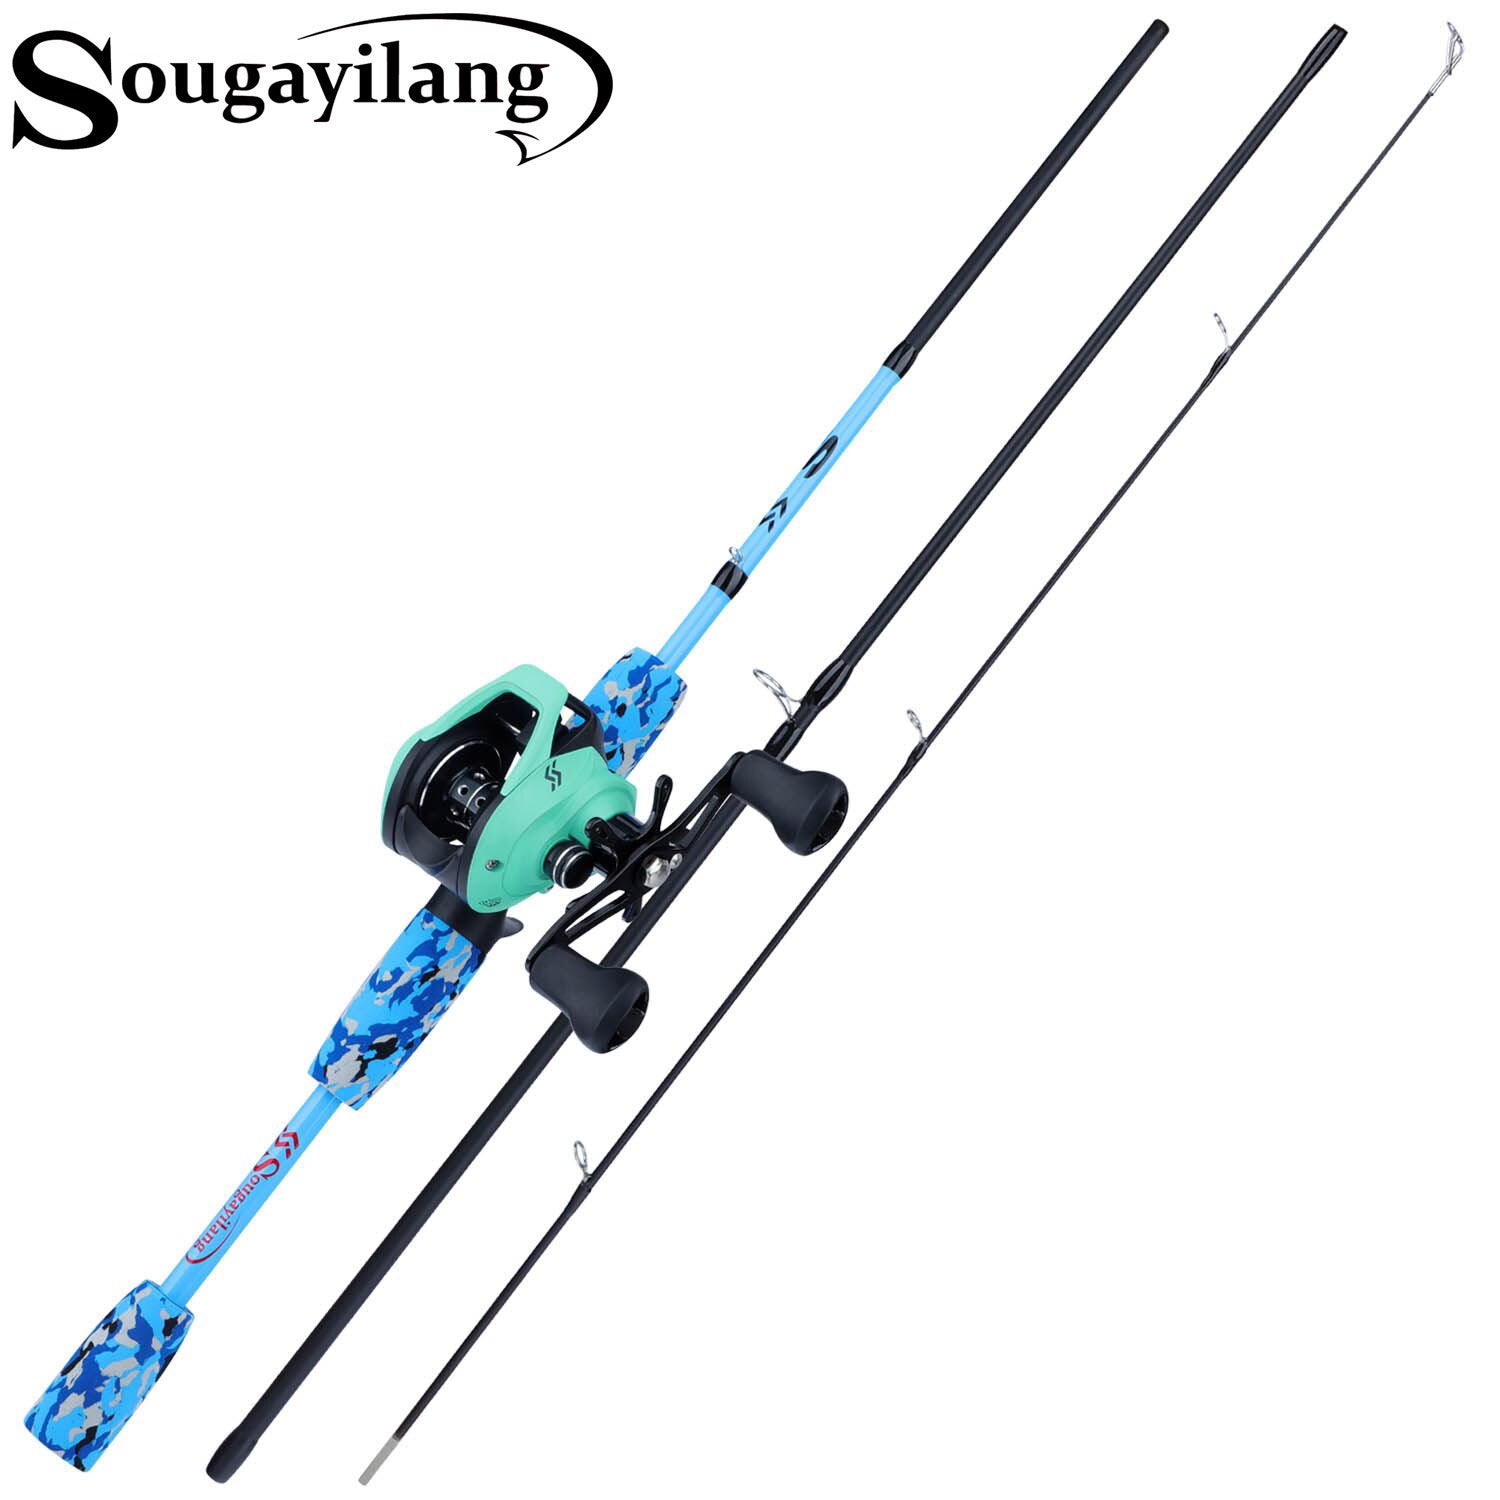 Sougayilang Camouflage Fishing Rod and Reel Combo Set Portable 3 Section  Casting Rod and 7.2:1 12+1BB Baitcasting Fishing Reel